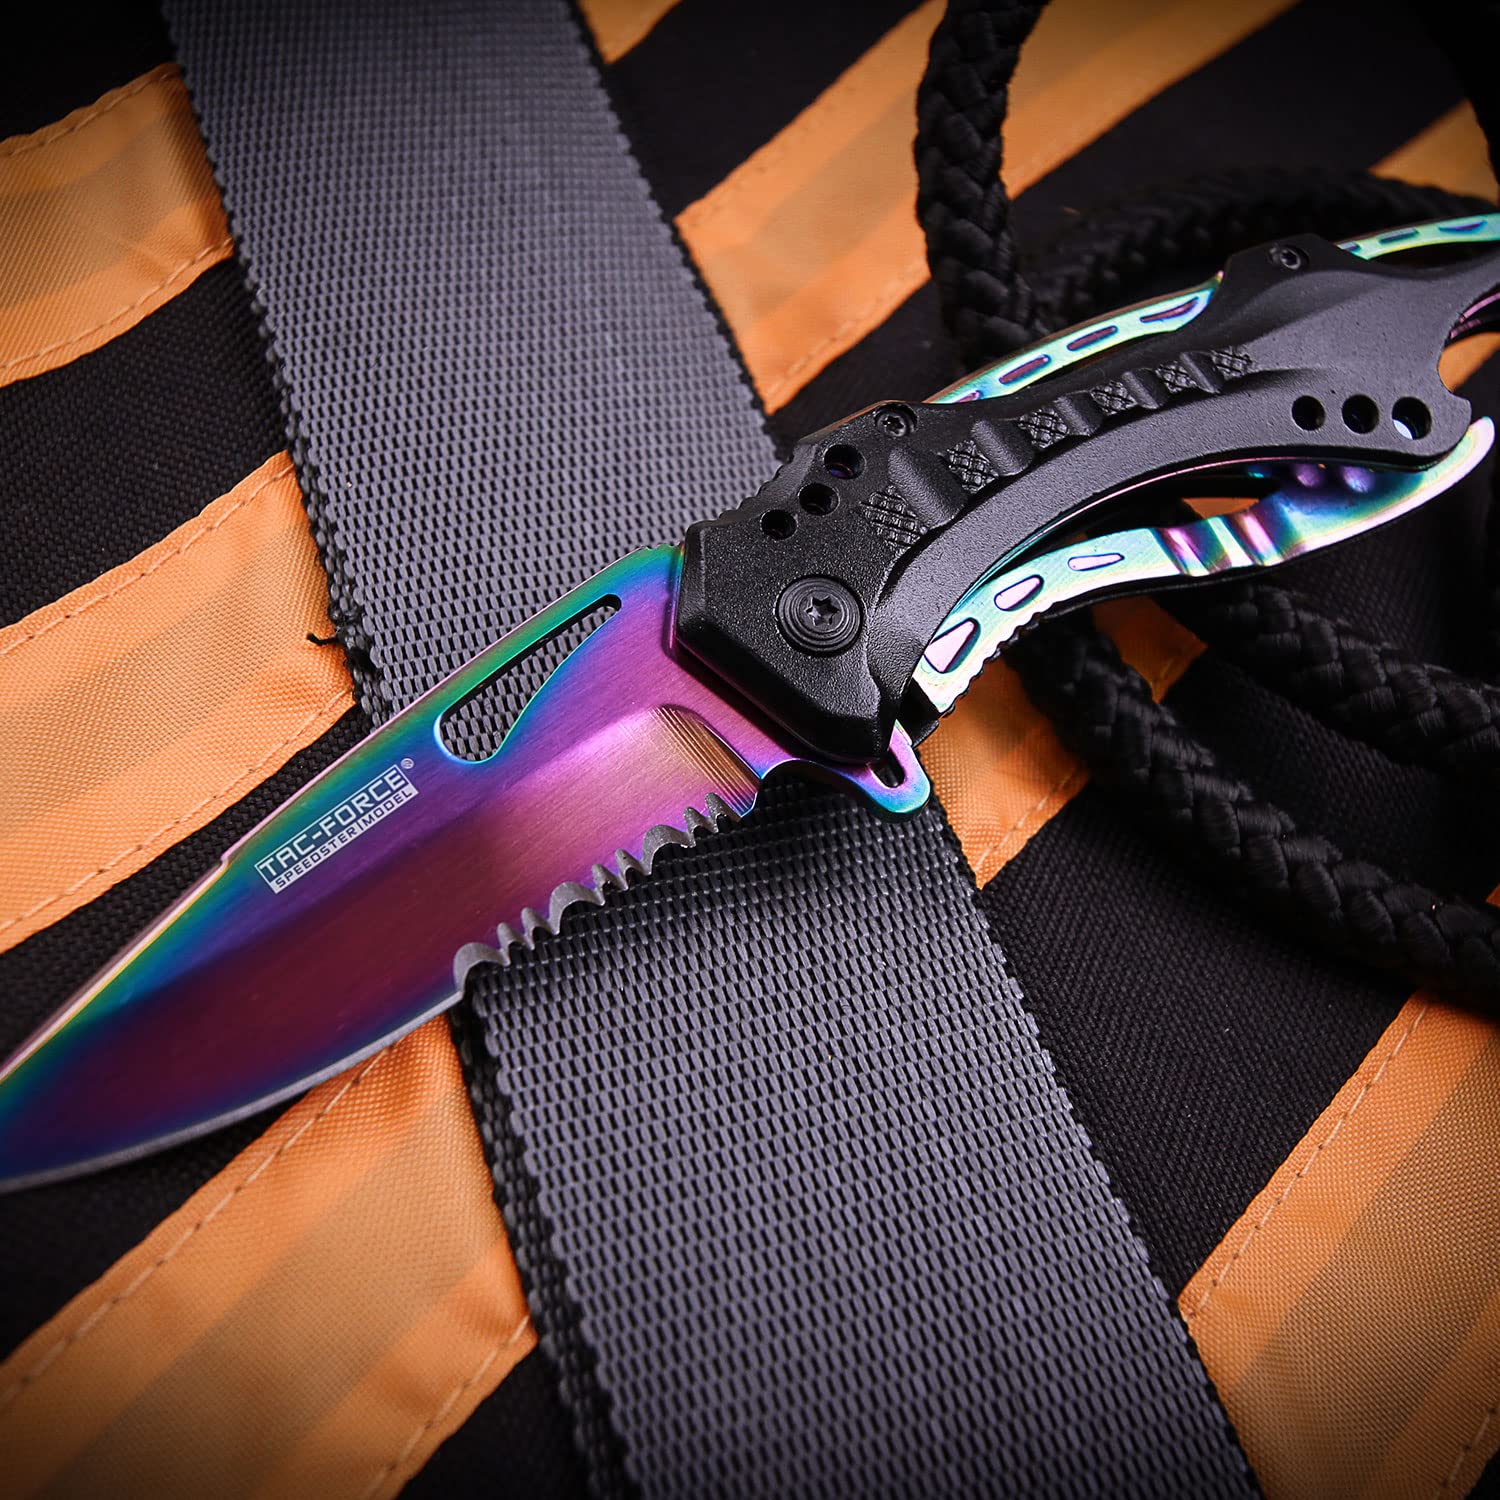 TAC Force Spring Assisted Folding Pocket Knife – Rainbow TiNite Coated Stainless Steel Blade with Black Aluminum Handle, Bottle Opener, Glass Punch and Pocket Clip, Tactical, EDC, Rescue - TF-705RB